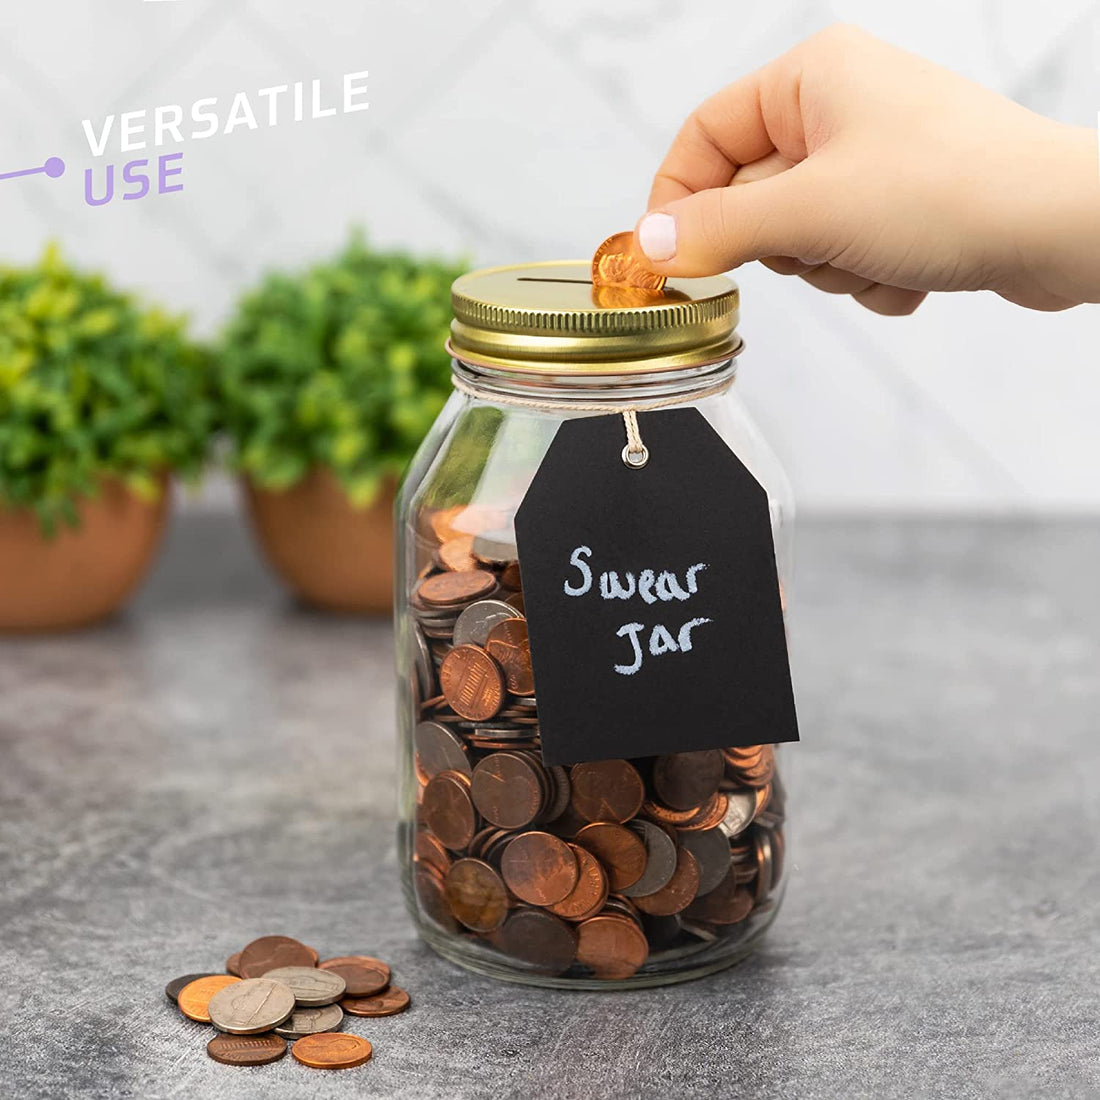 Will Your Coin Jar Be Used As A Swear Jar?